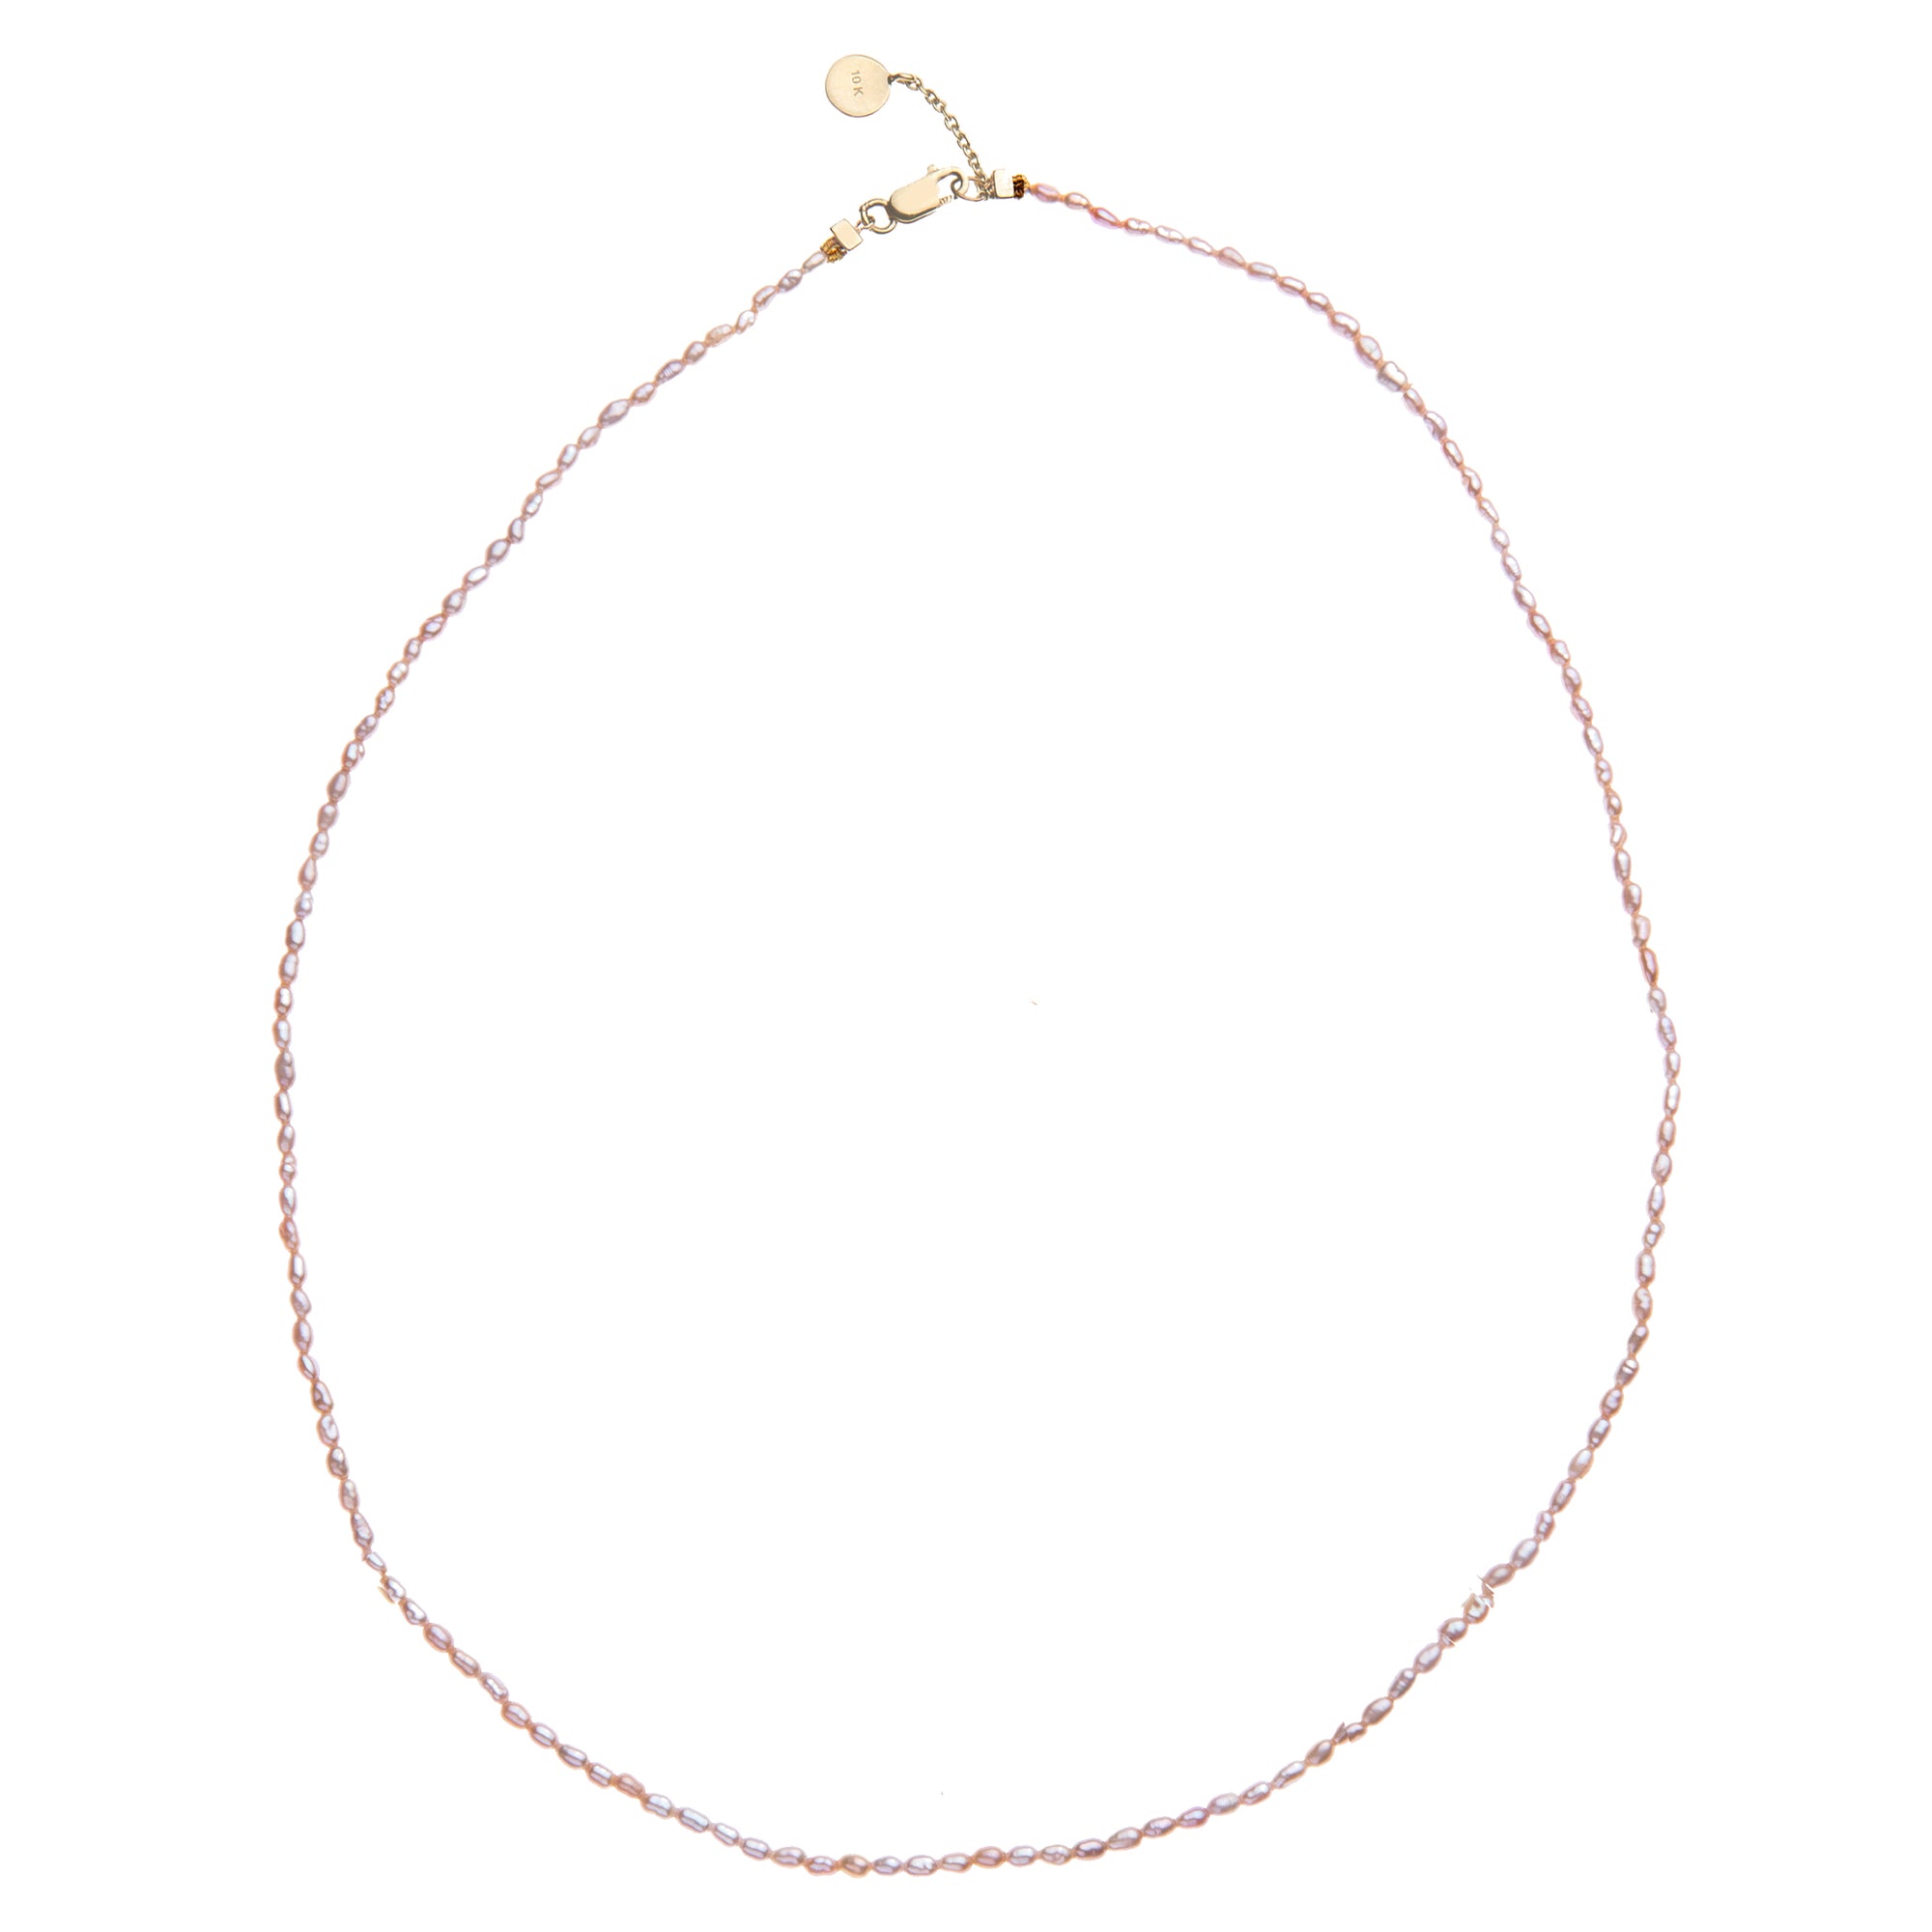 JW x House of Harris Rice Pearl Necklace in 10k Gold